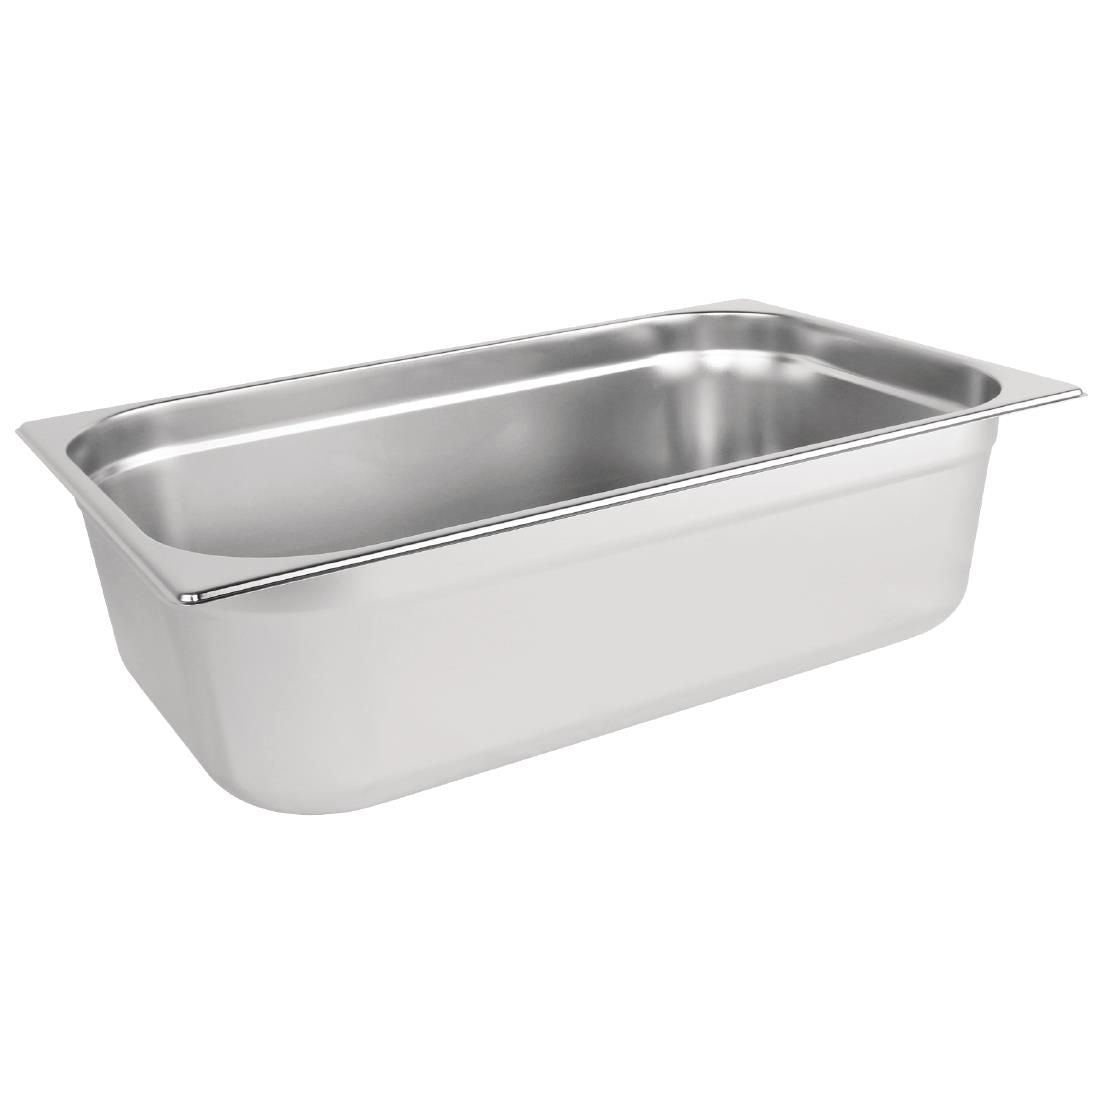 K924 Vogue Stainless Steel 1/1 Gastronorm Pan 150mm